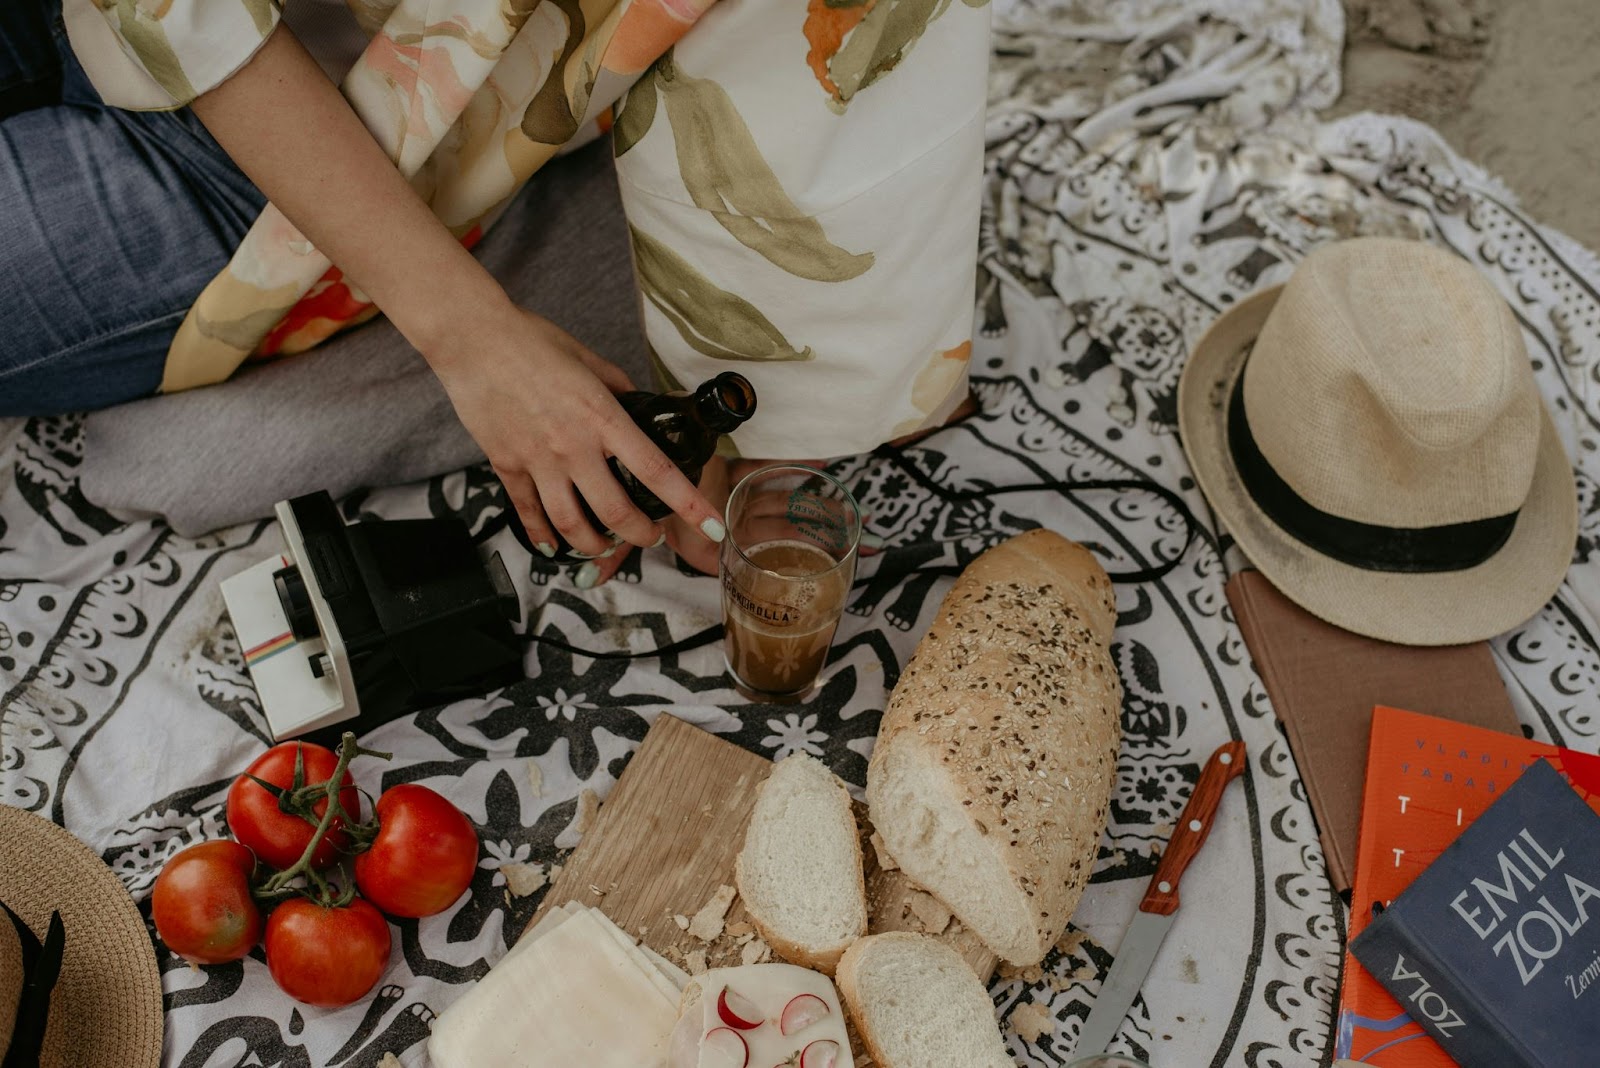 picnic blanket with food and bottled beverage along with books camera and hat